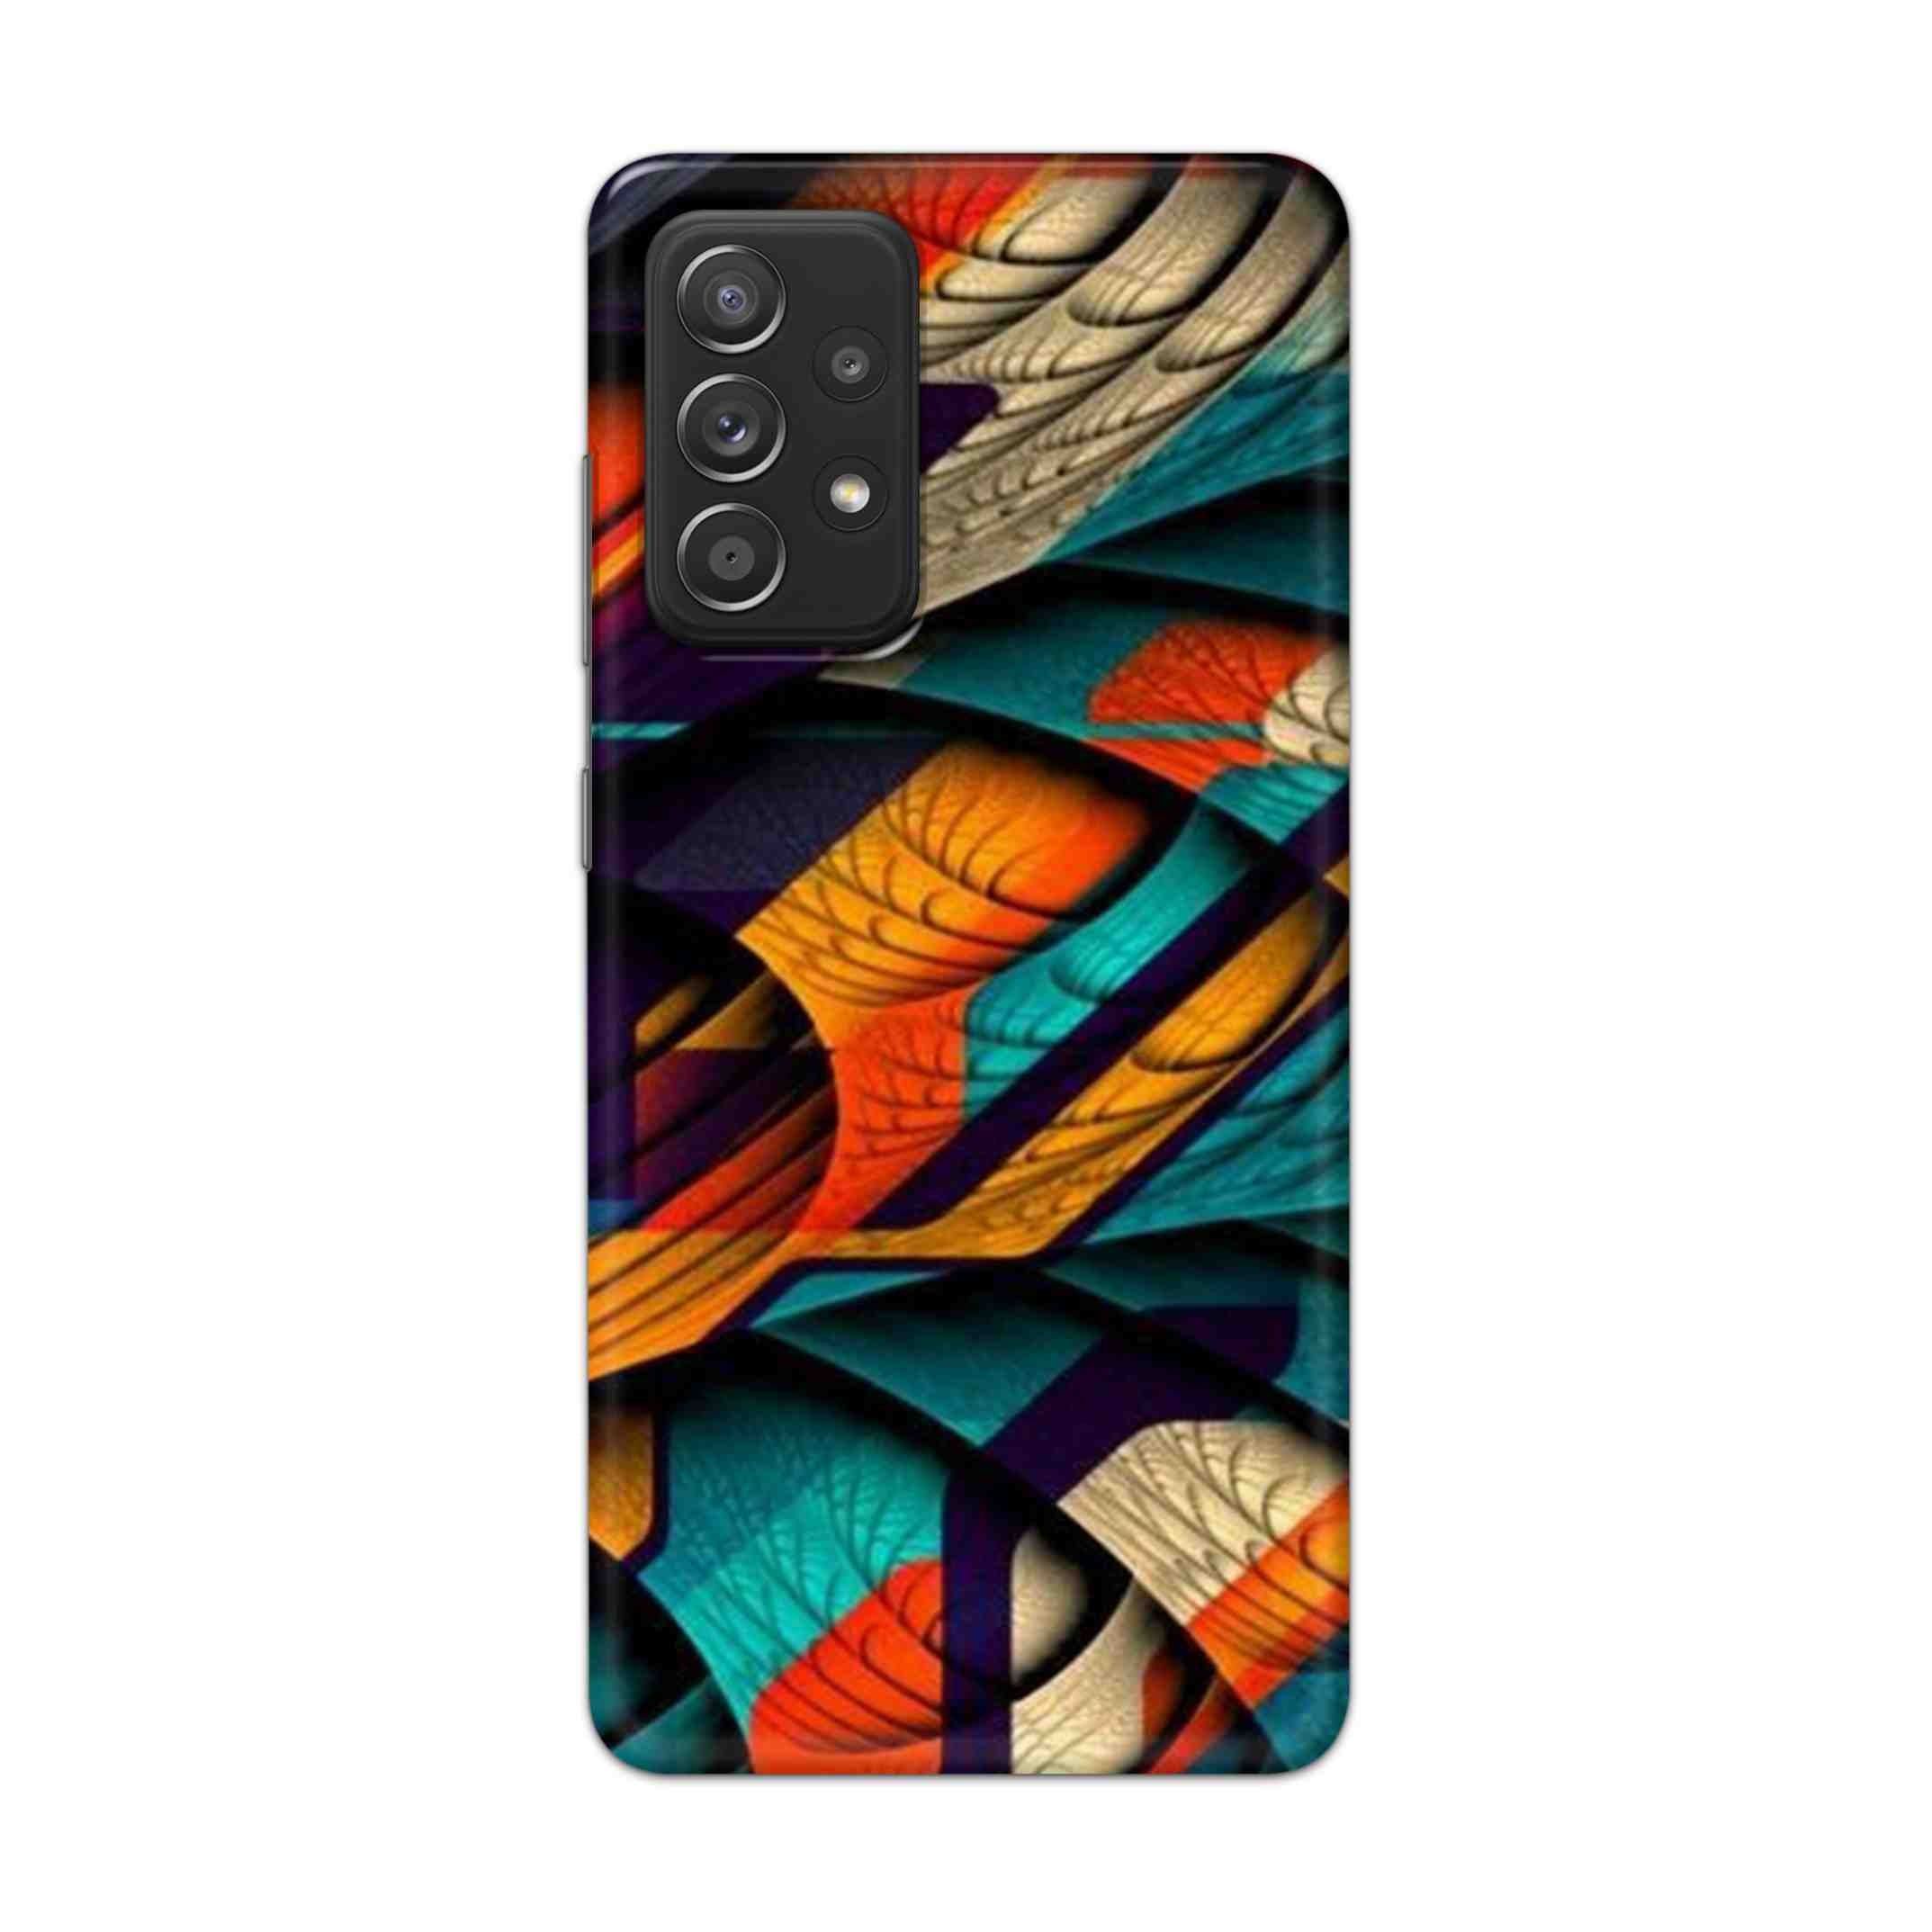 Buy Colour Abstract Hard Back Mobile Phone Case Cover For Samsung Galaxy A52 Online